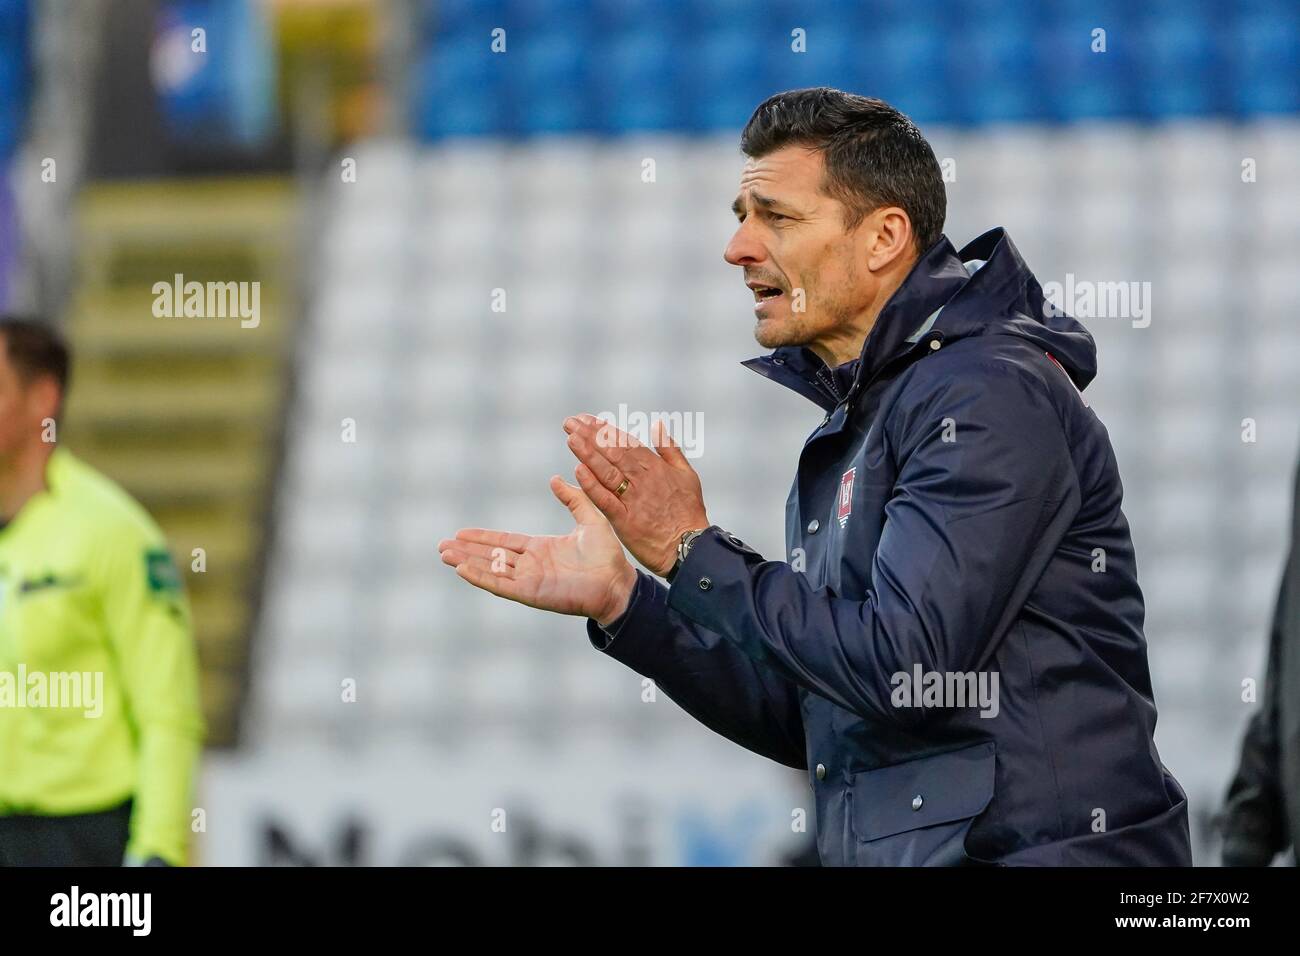 Odense, Denmark. 09th Apr, 2021. Head coach Constantin Galca of Vejle  Boldklub seen during the 3F Superliga match between Odense Boldklub and  Vejle Boldklub at Nature Energy Park in Odense. (Photo Credit: